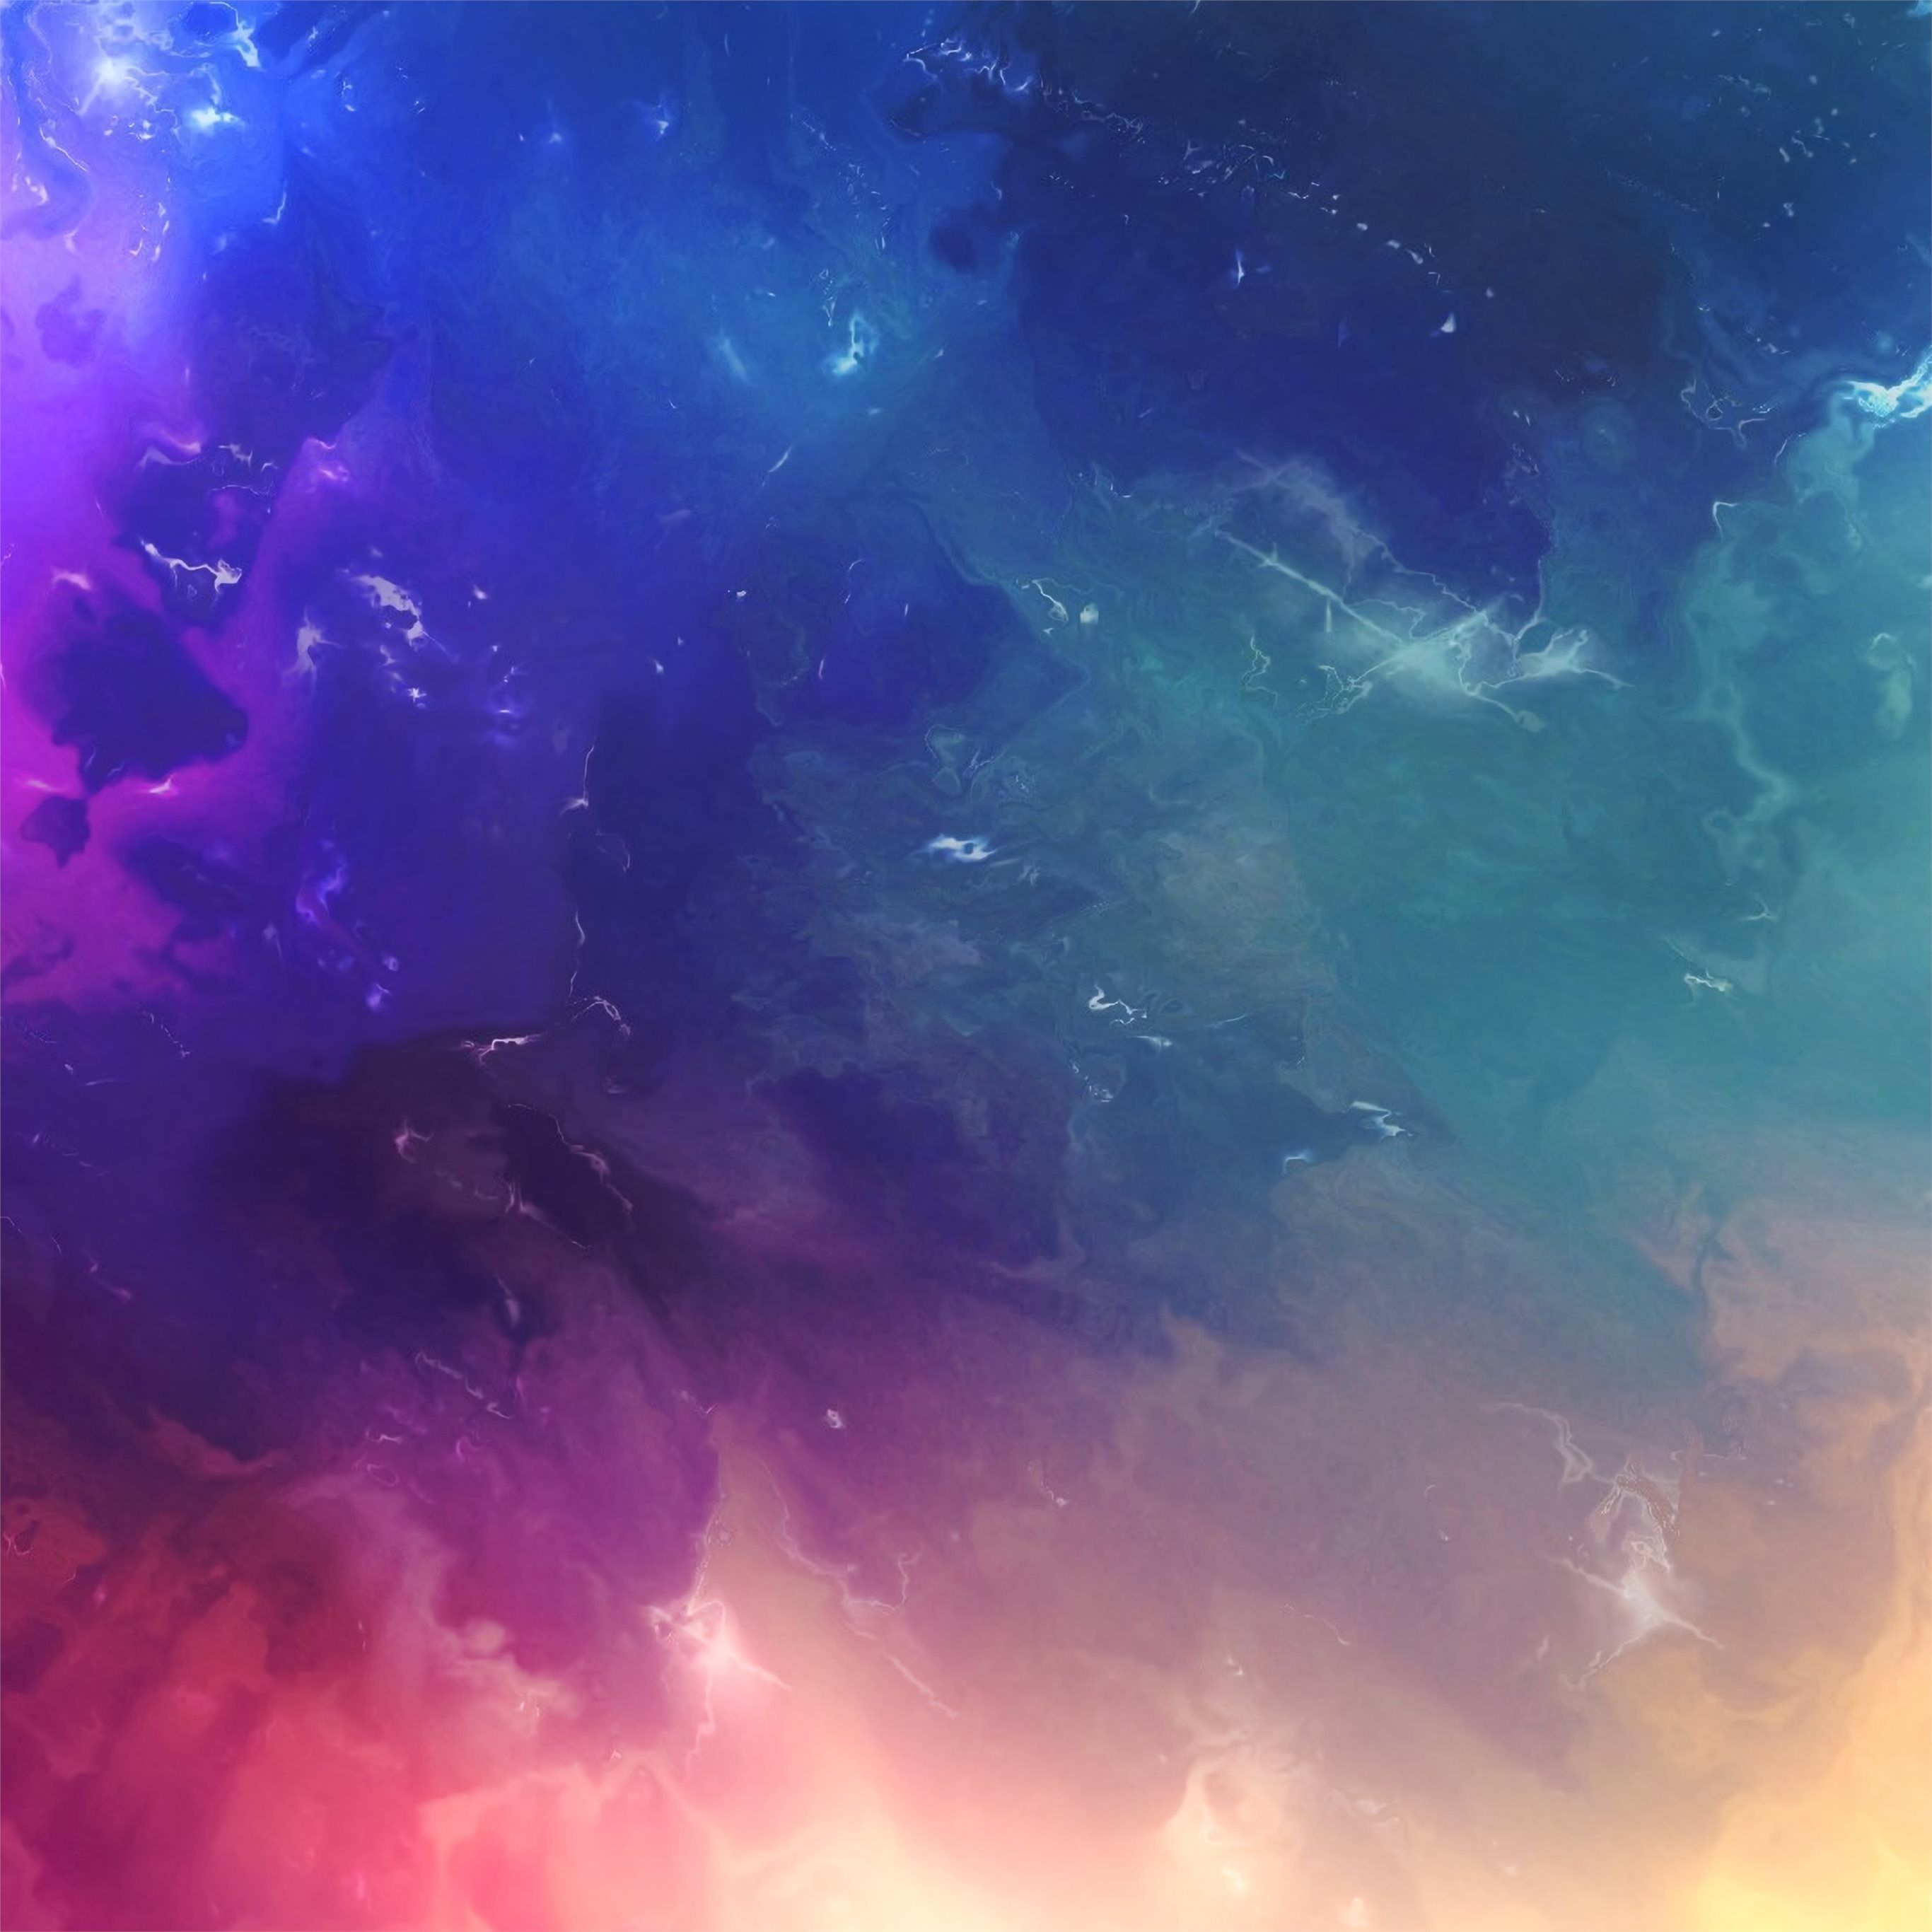 space colorful abstract 4k iPad Pro Wallpaper Free Download